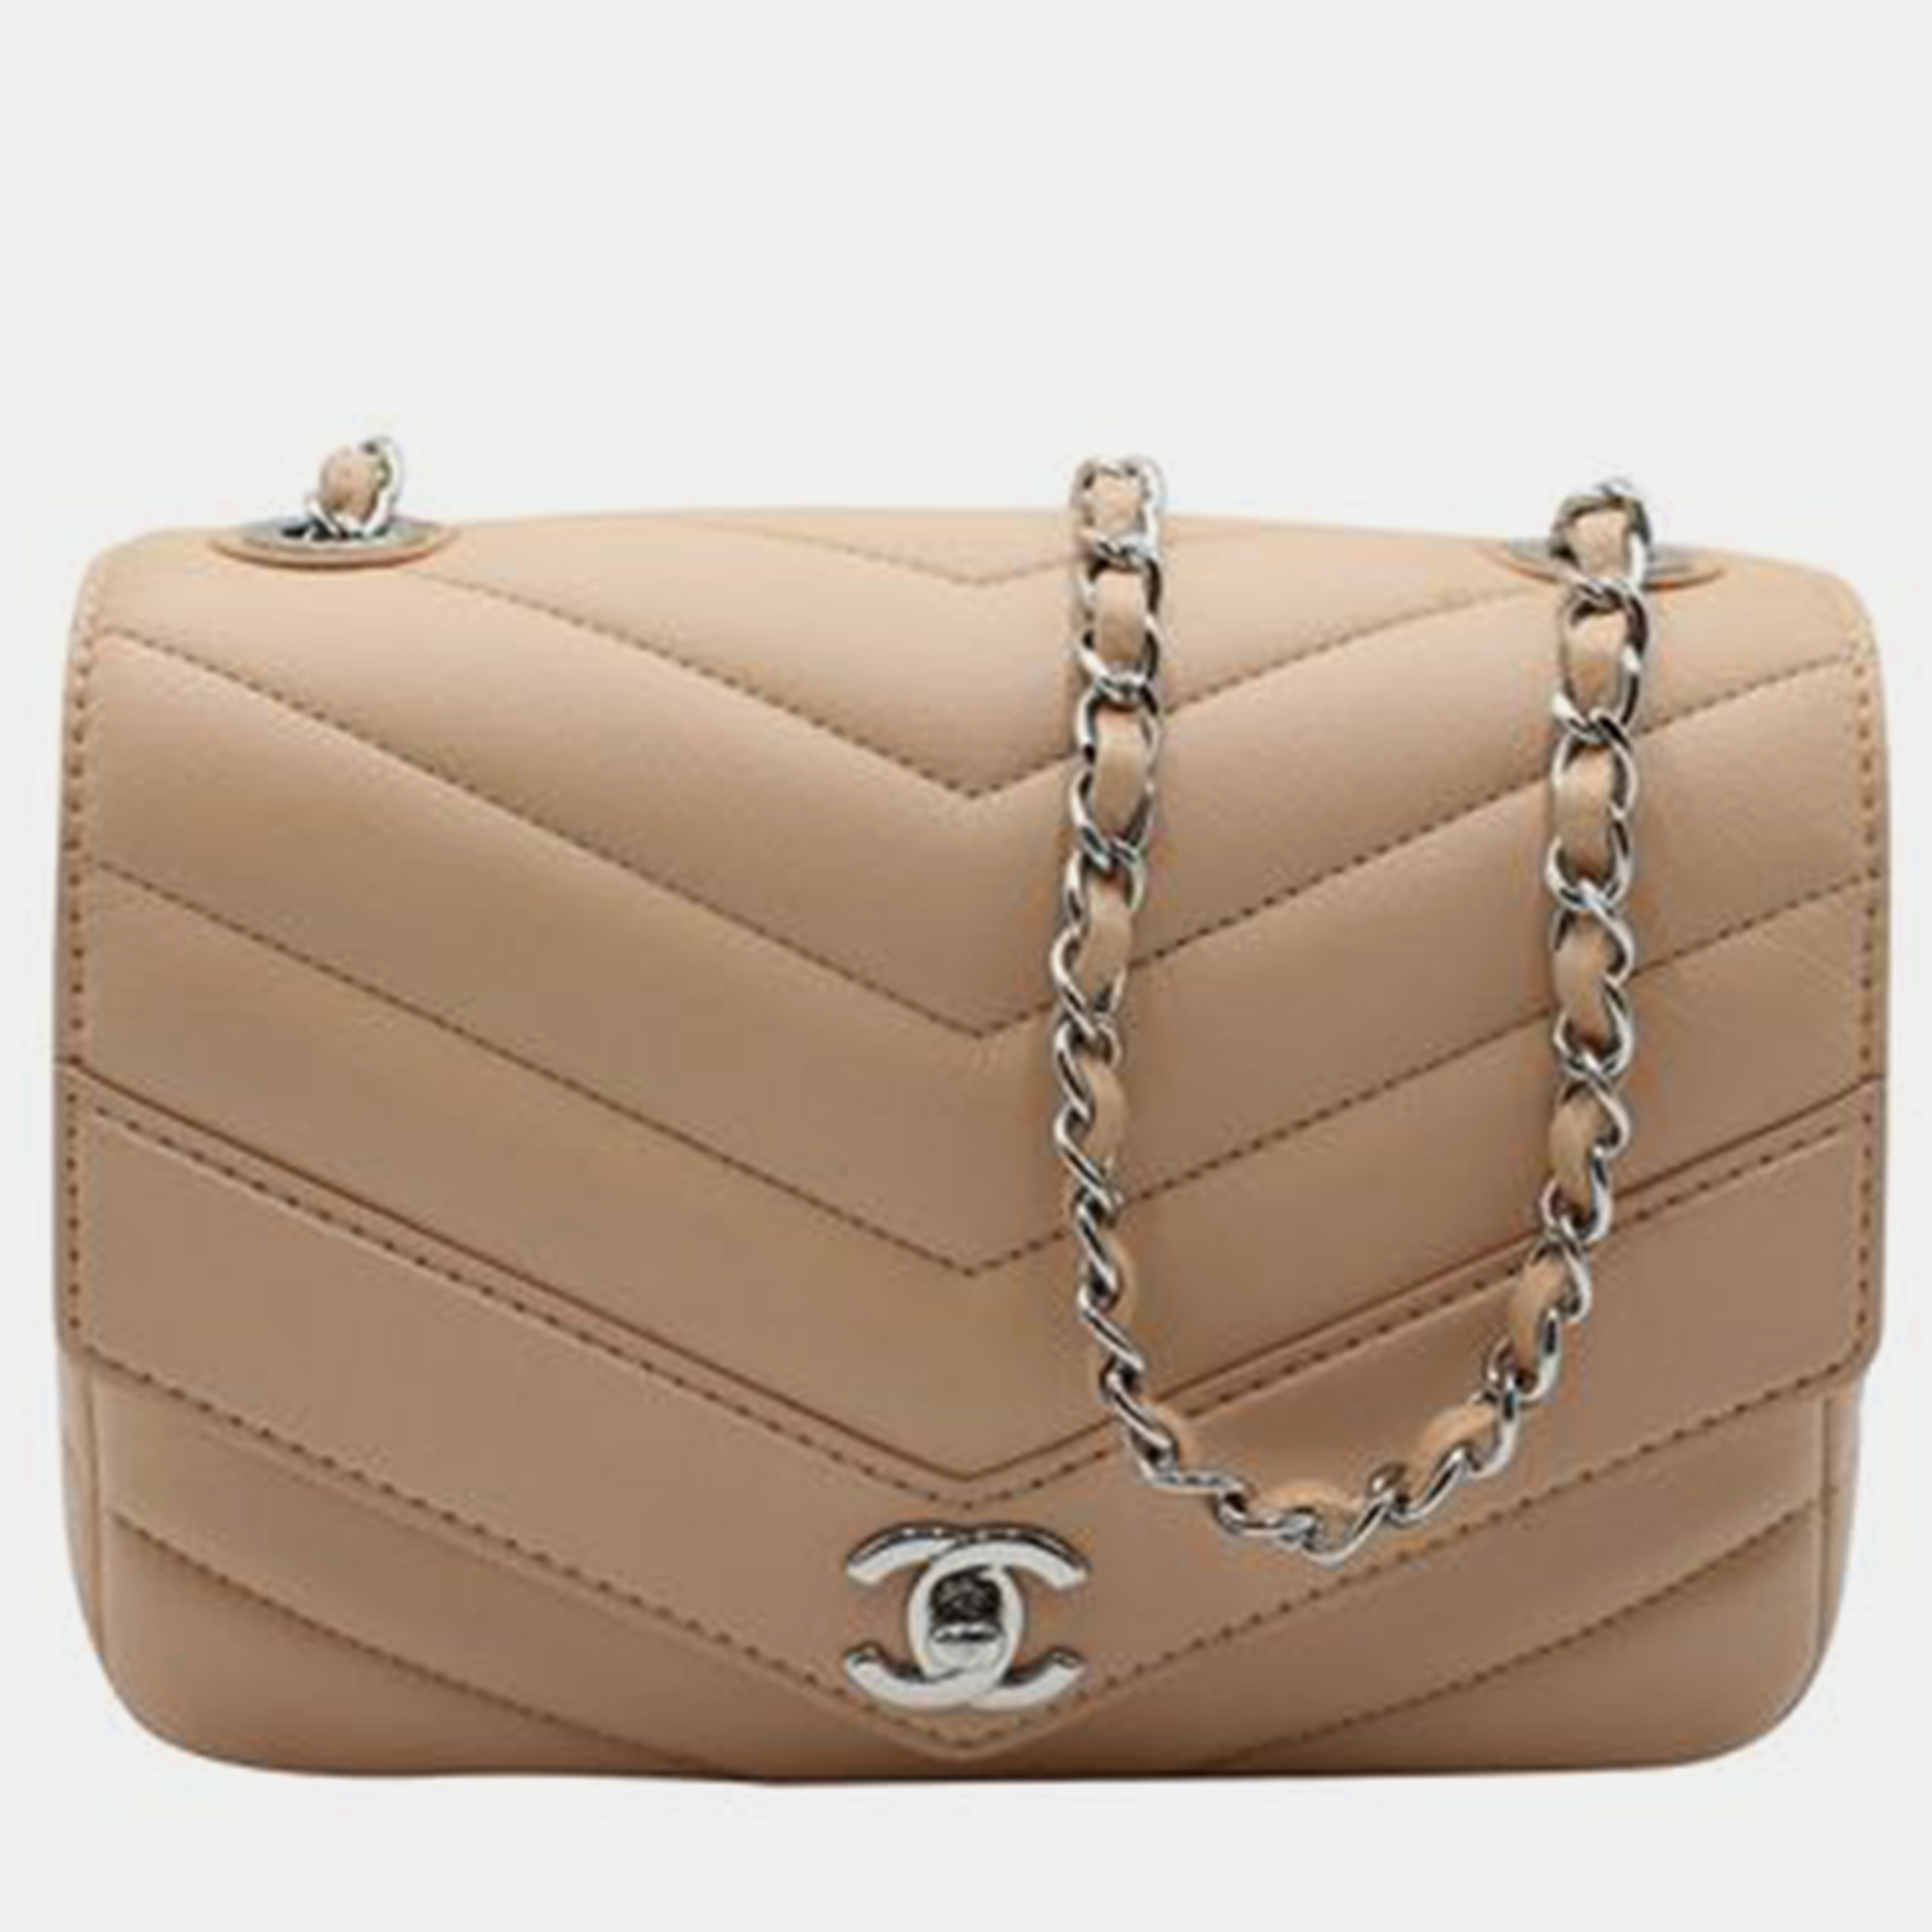 CHANEL Nude Chevron Flap Bag In Silver Hardware SHOULDER BAGS